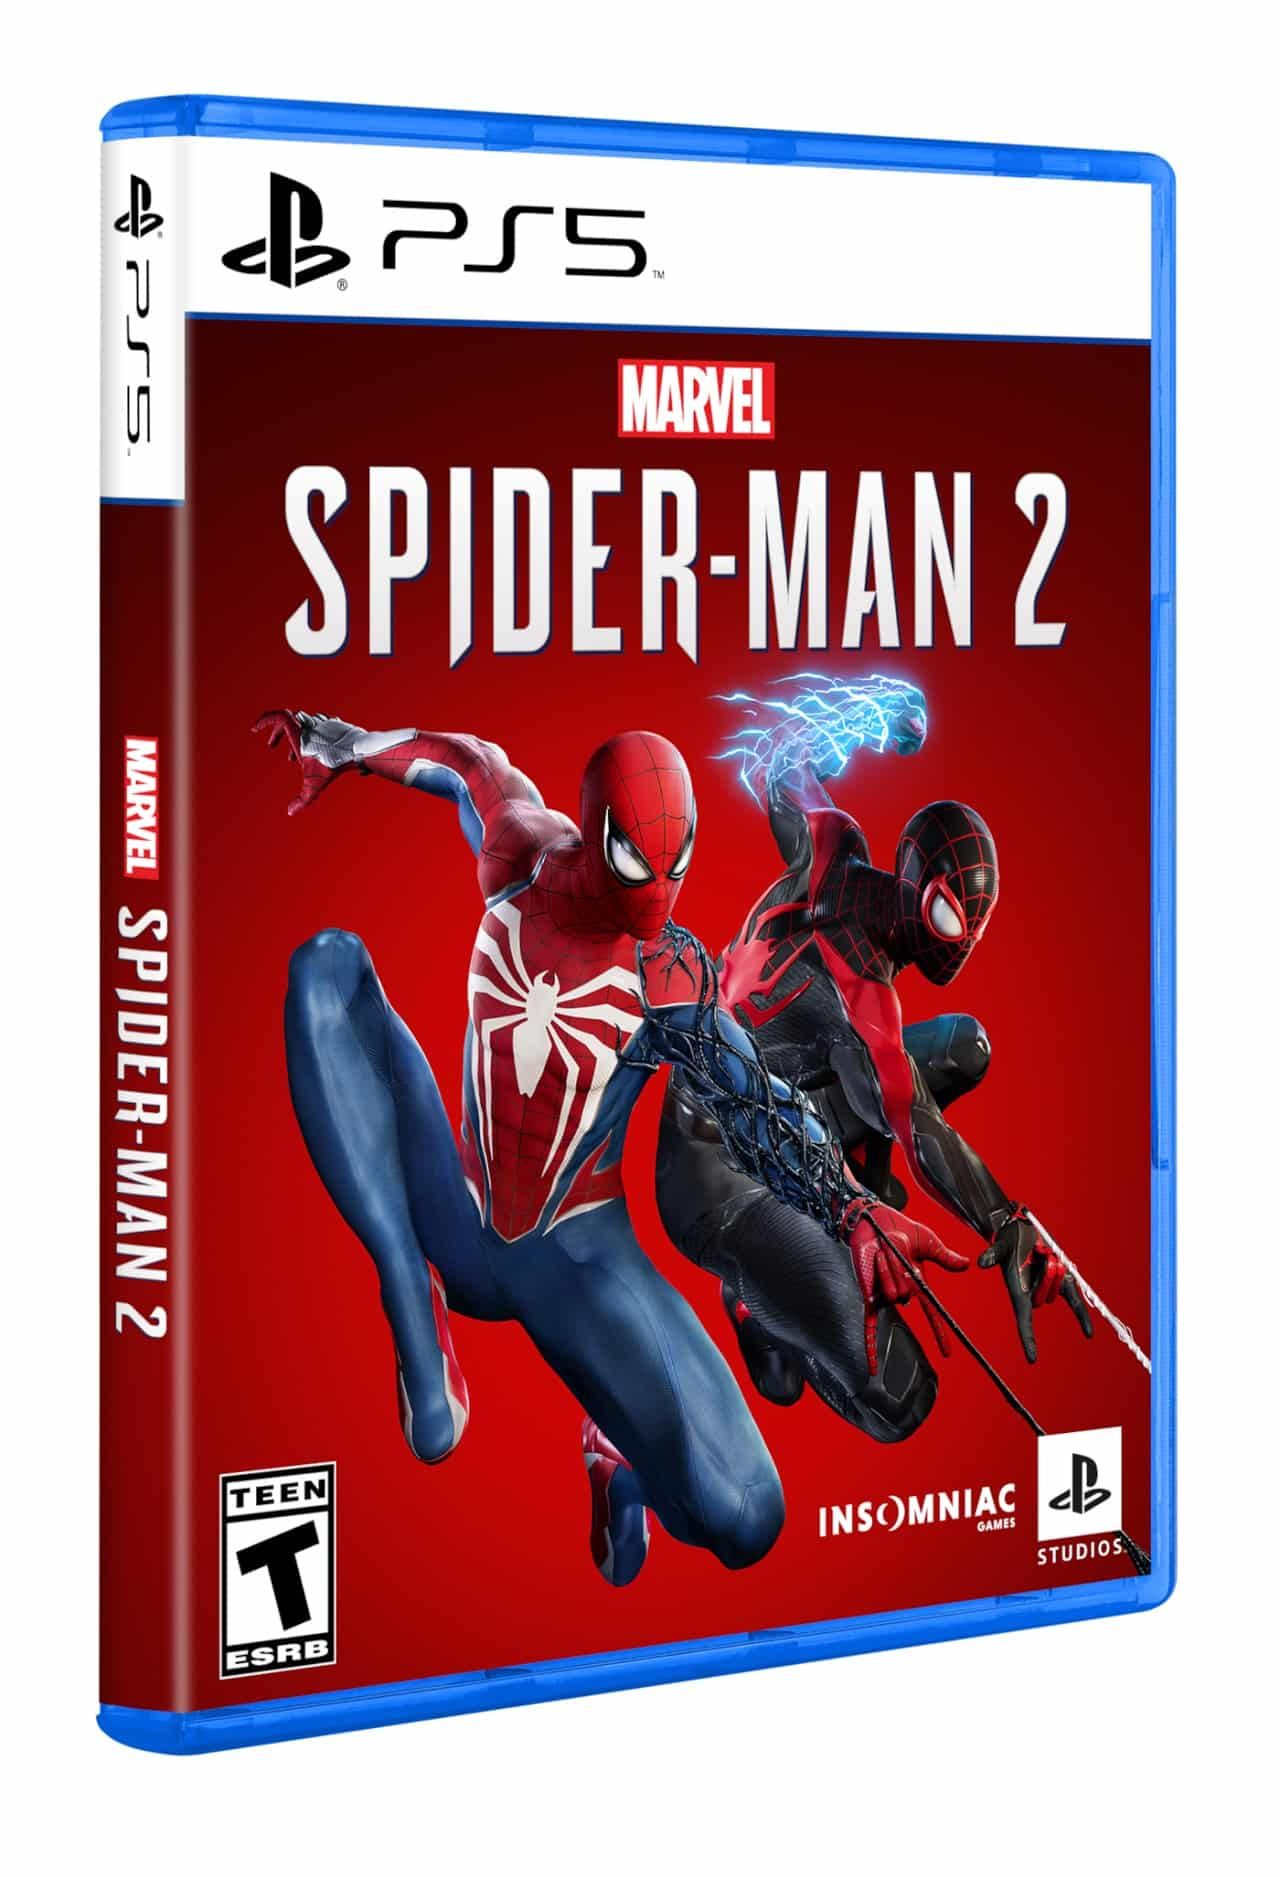 Spider-Man 2 (Extended Edition) - Movies on Google Play